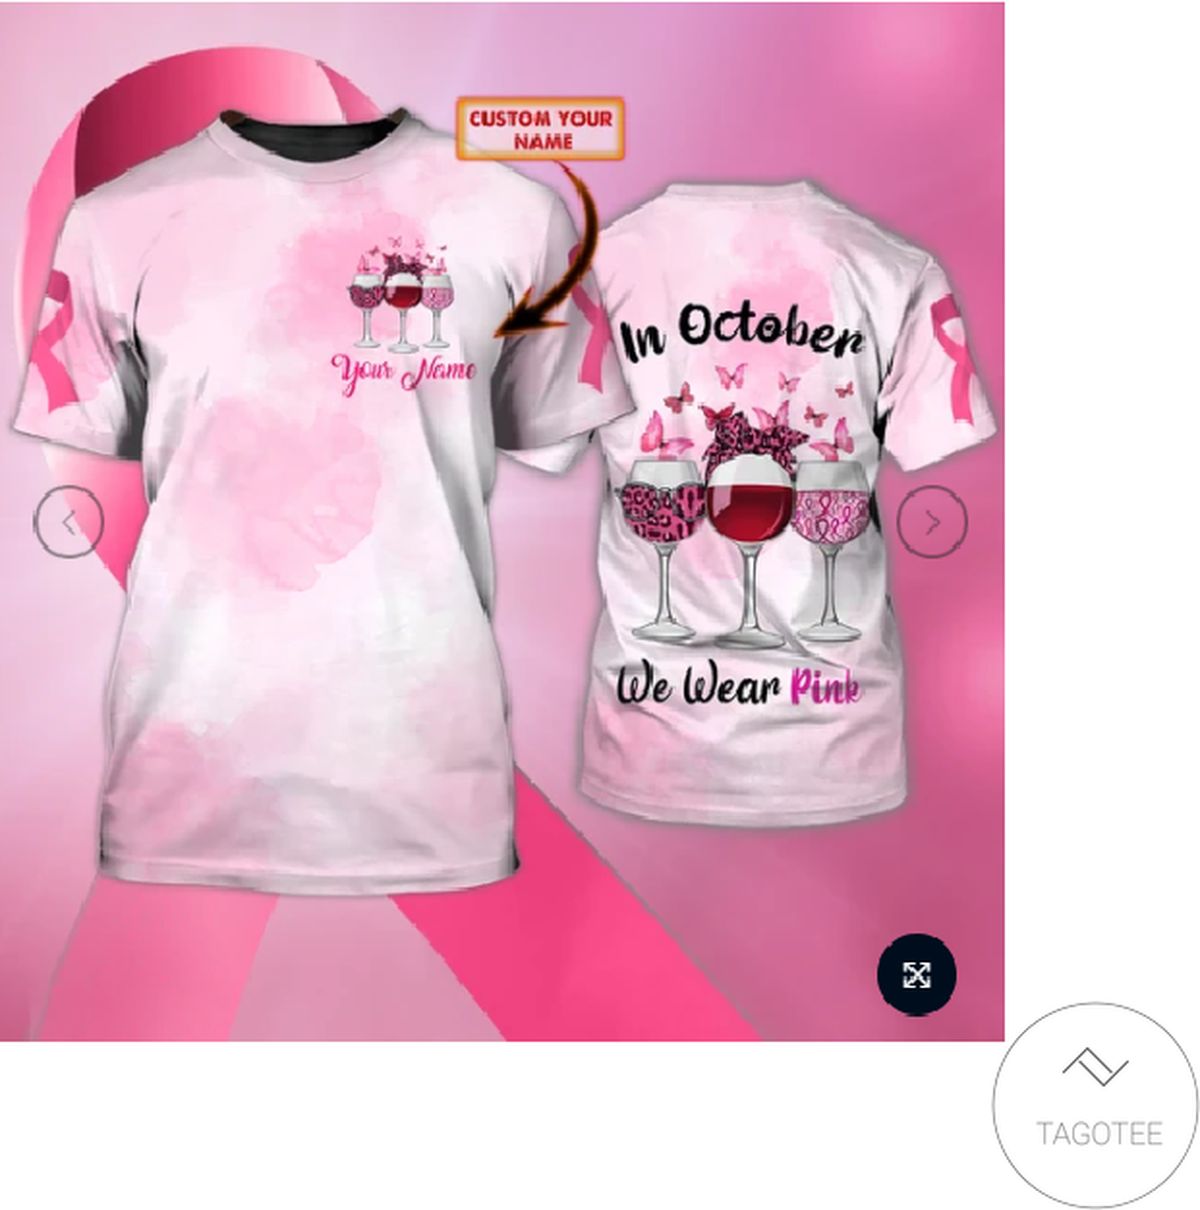 Personalized Never Breast Cancer Awareness Wine Glasses In October We Wear Pink 3d Shirt